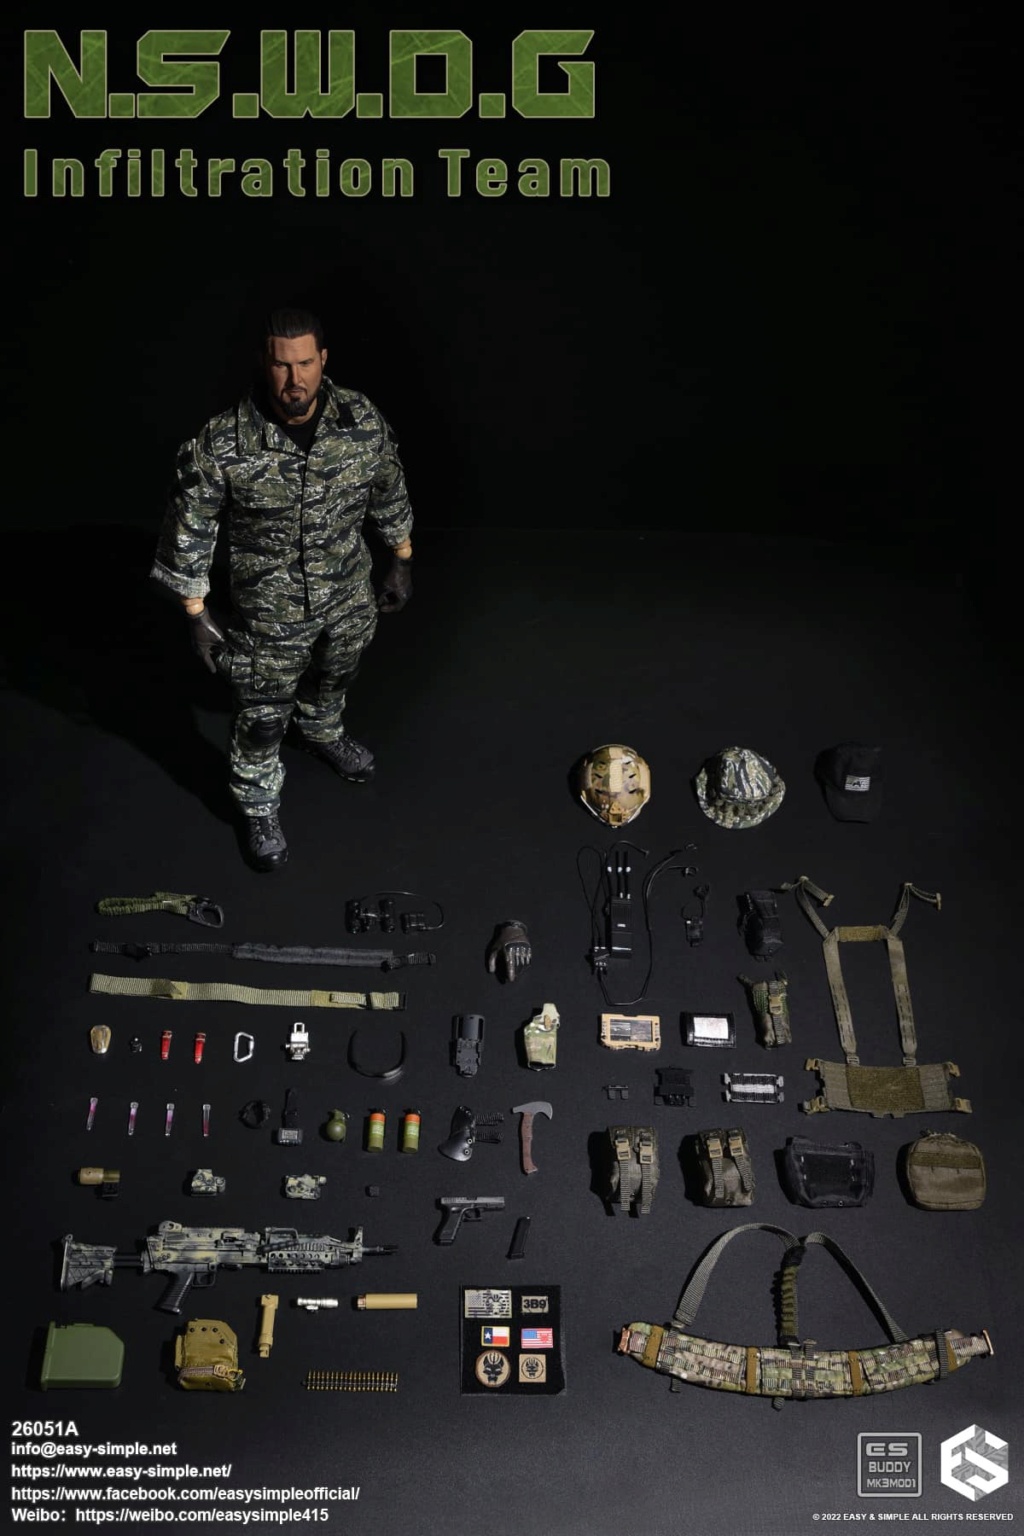 NEW PRODUCT: EASY AND SIMPLE 1/6 SCALE FIGURE: N.S.W.D.G INFILTRATION TEAM - (2 Versions) 44115